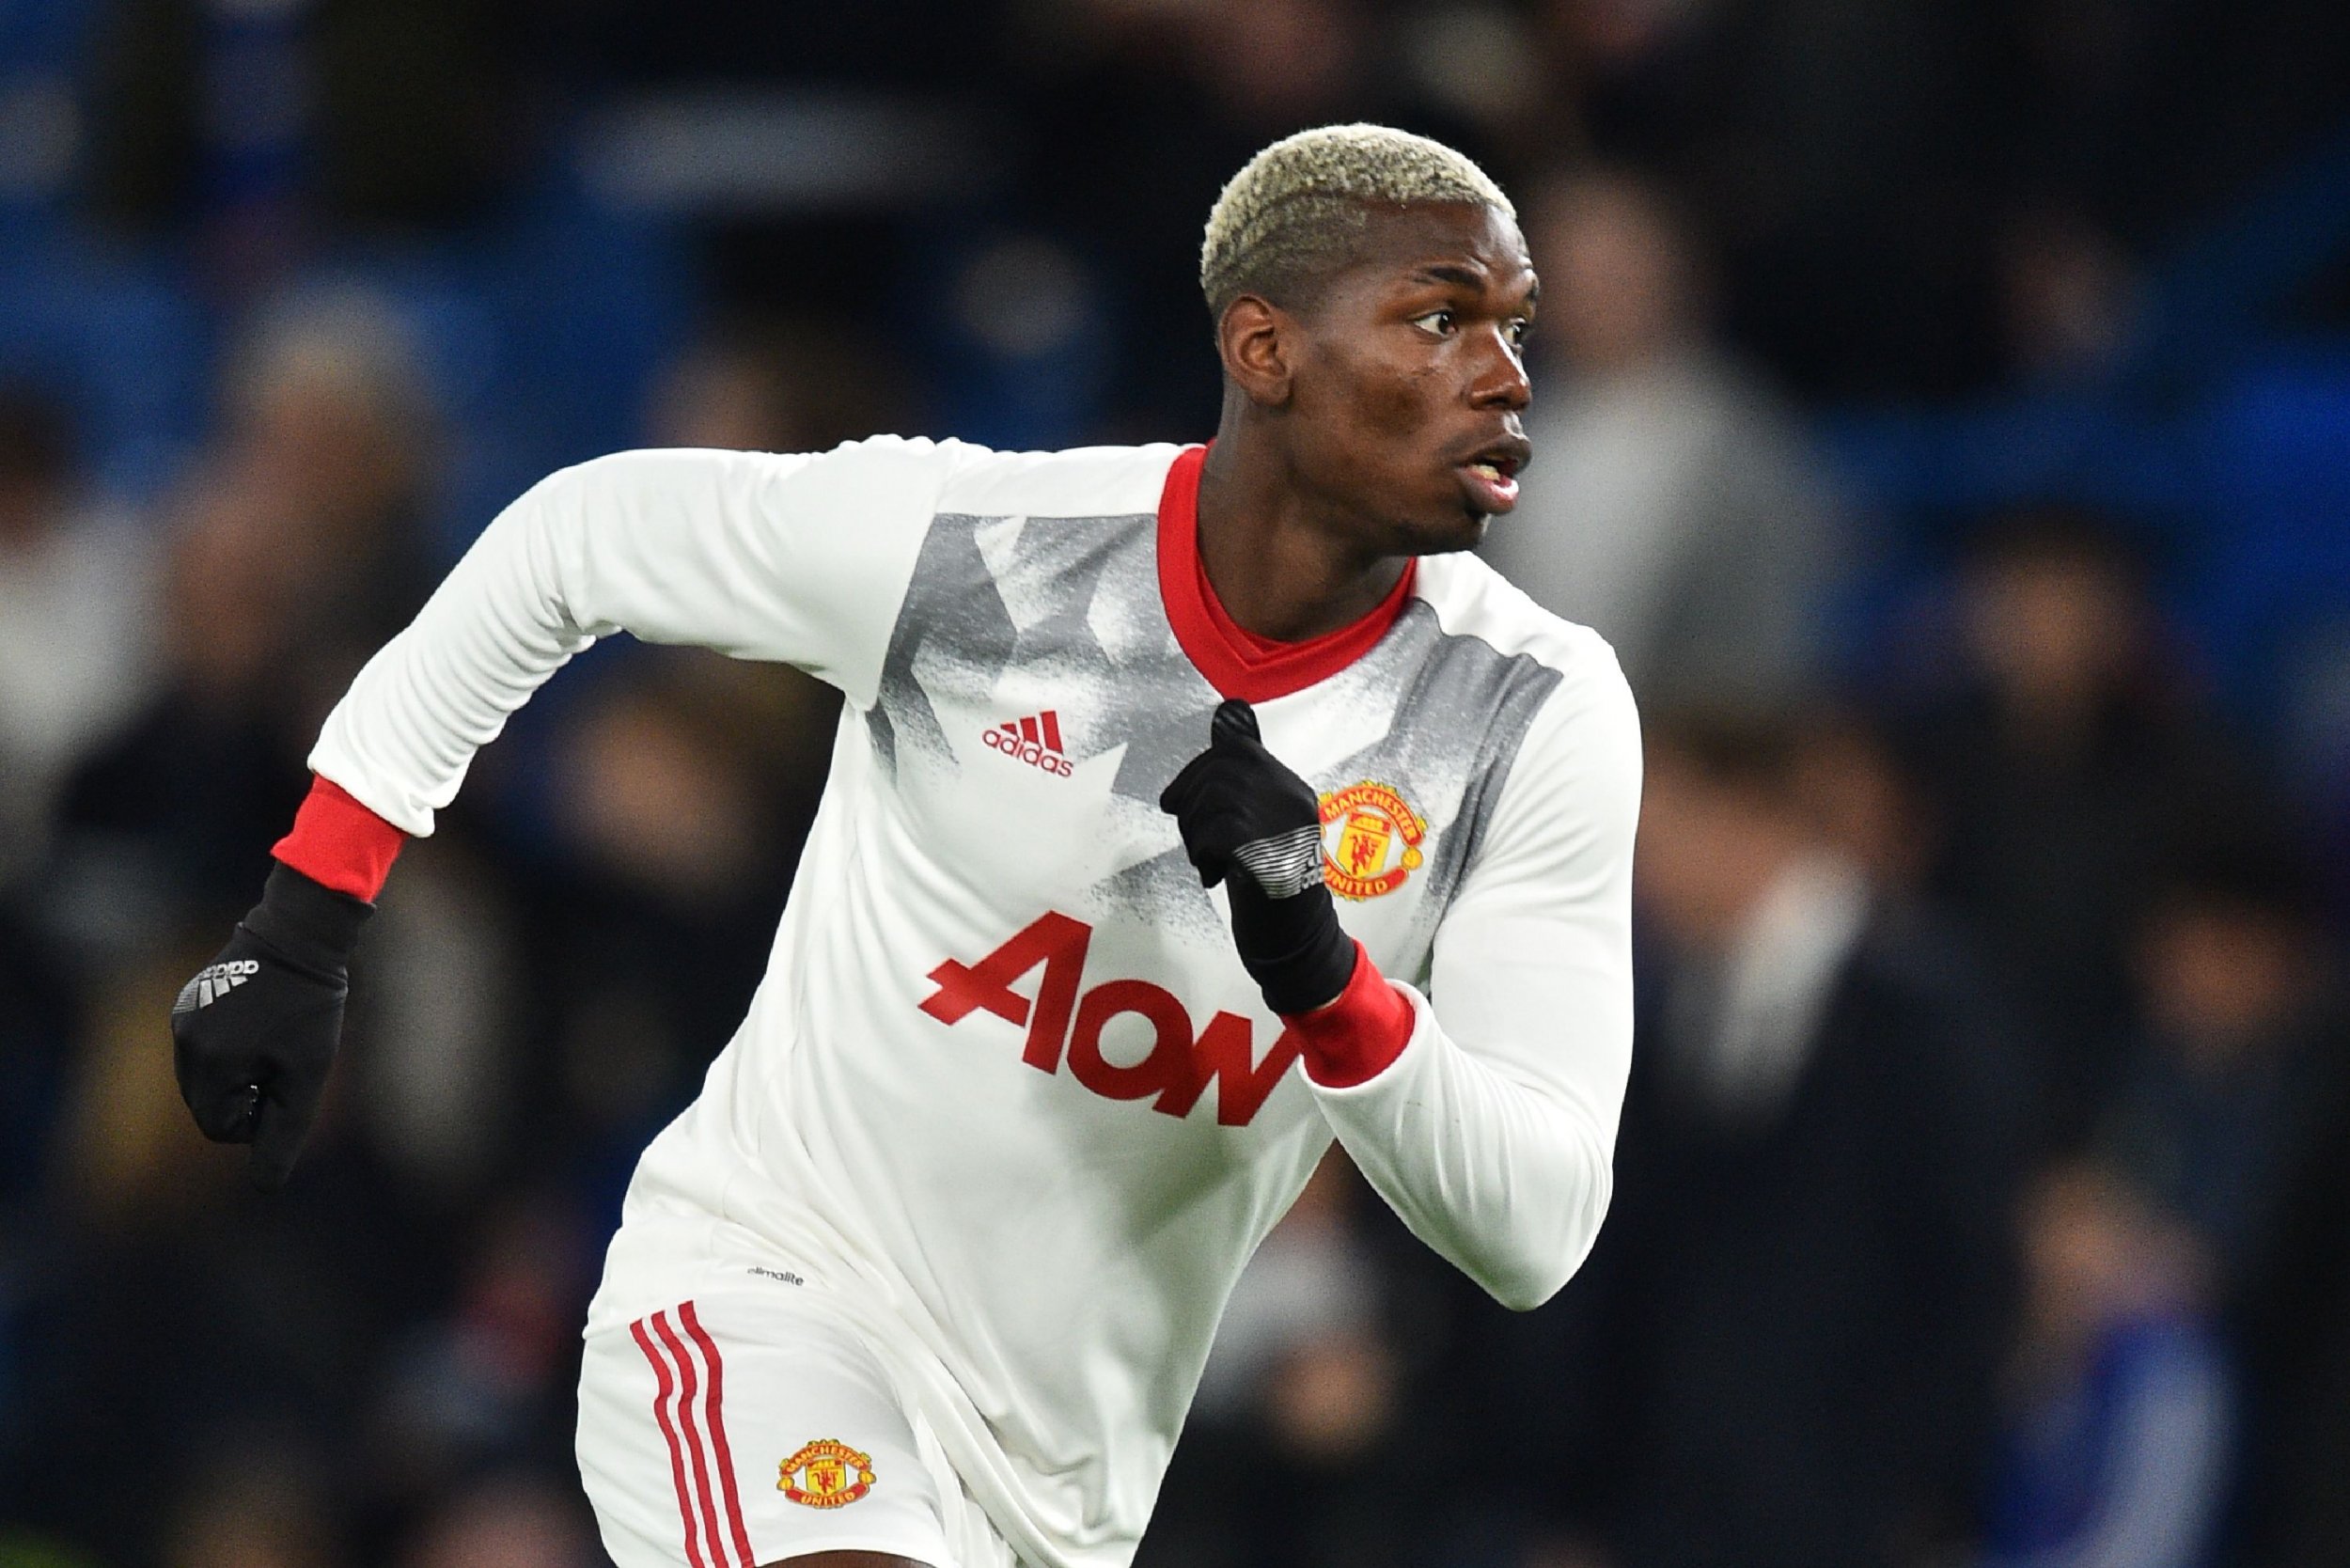 Paul Pogba at 24: How the Manchester United Star Compares to Football's